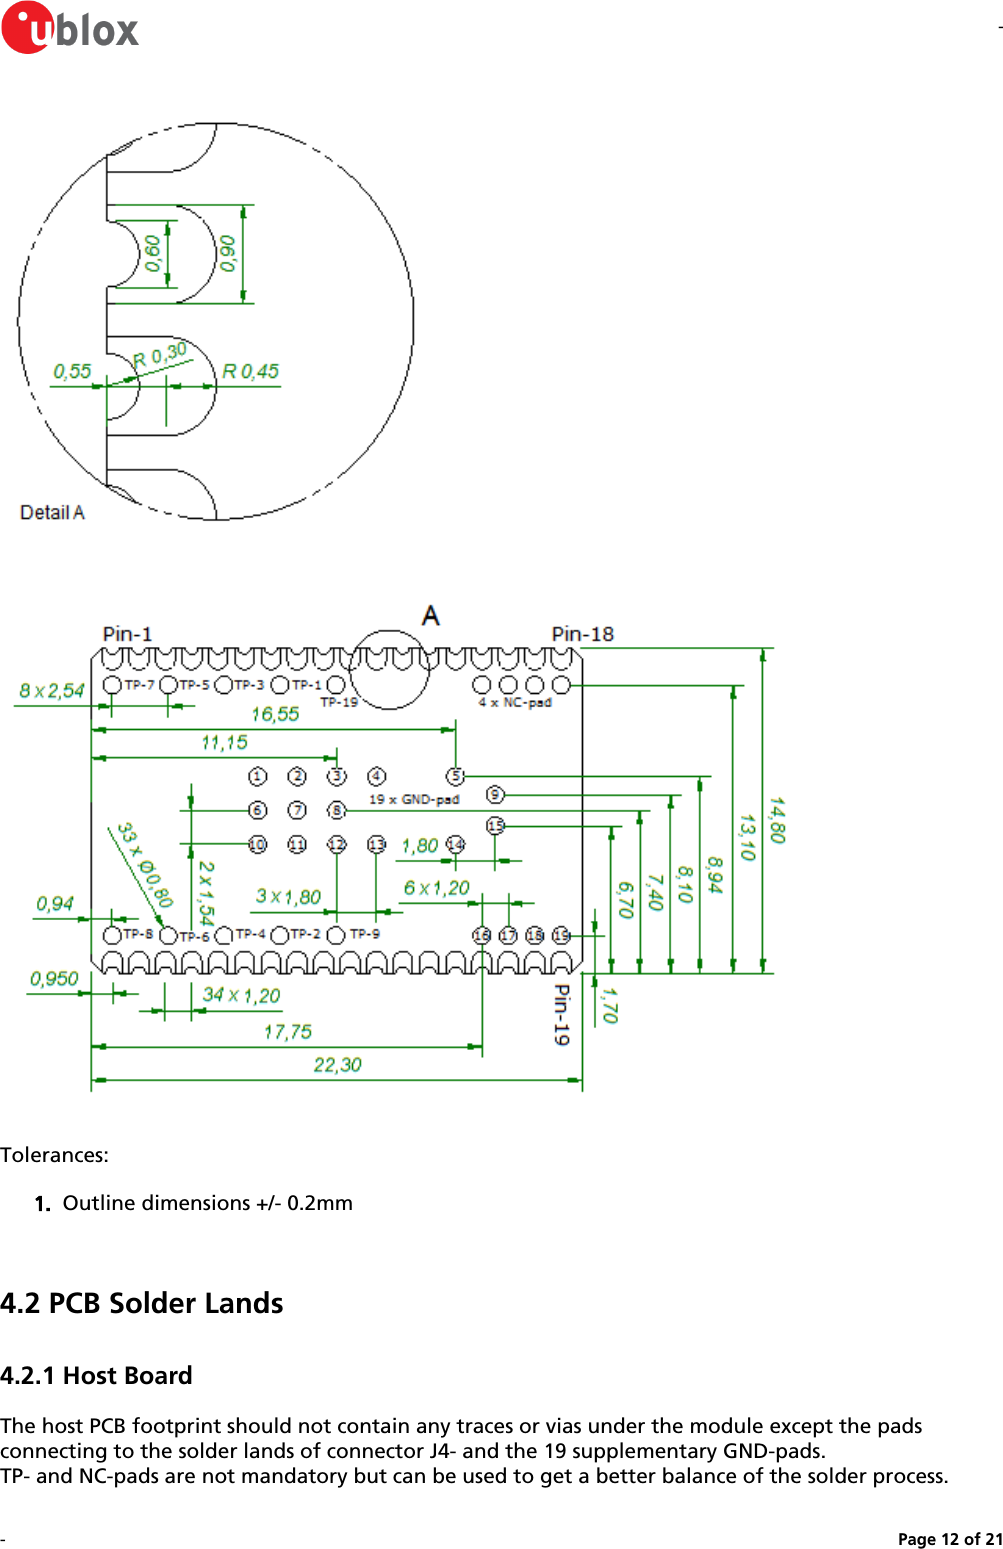 --Page   of 12 211.  Tolerances:Outline dimensions +/- 0.2mm4.2 PCB Solder Lands4.2.1 Host BoardThe host PCB footprint should not contain any traces or vias under the module except the pads connecting to the solder lands of connector J4- and the 19 supplementary GND-pads.TP- and NC-pads are not mandatory but can be used to get a better balance of the solder process.